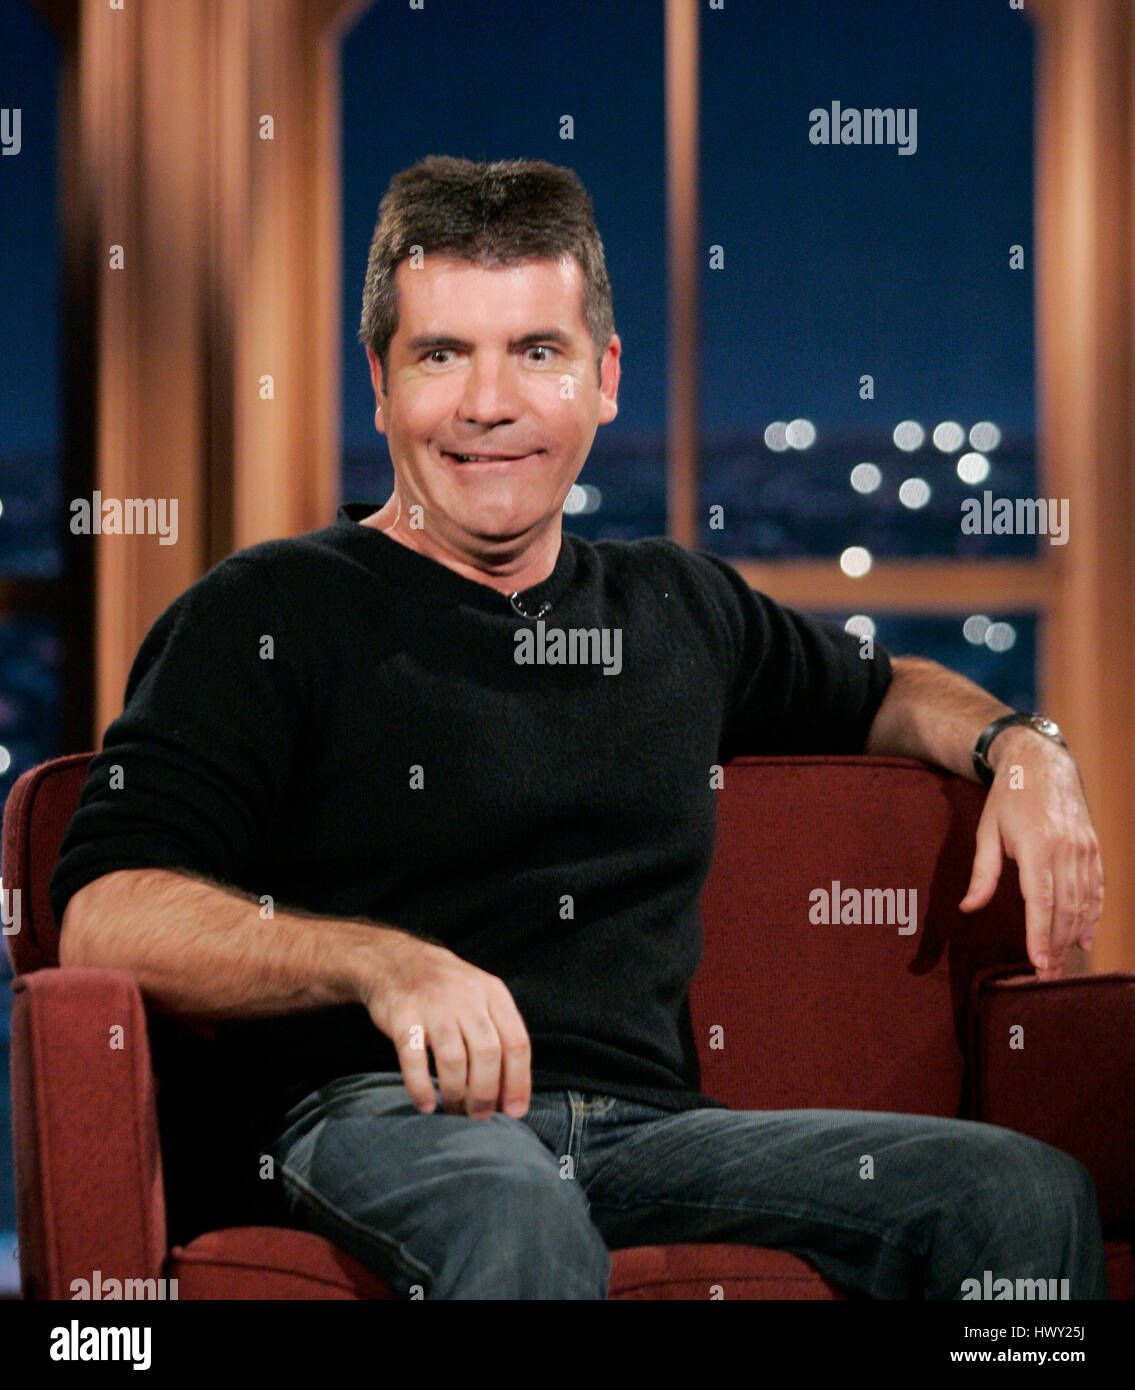 Simon Cowell during a segment of 'The Late Late Show with Craig Ferguson' at CBS Television City in Los Angeles, California, on April 20, 2009. Photo by Francis Specker Stock Photo